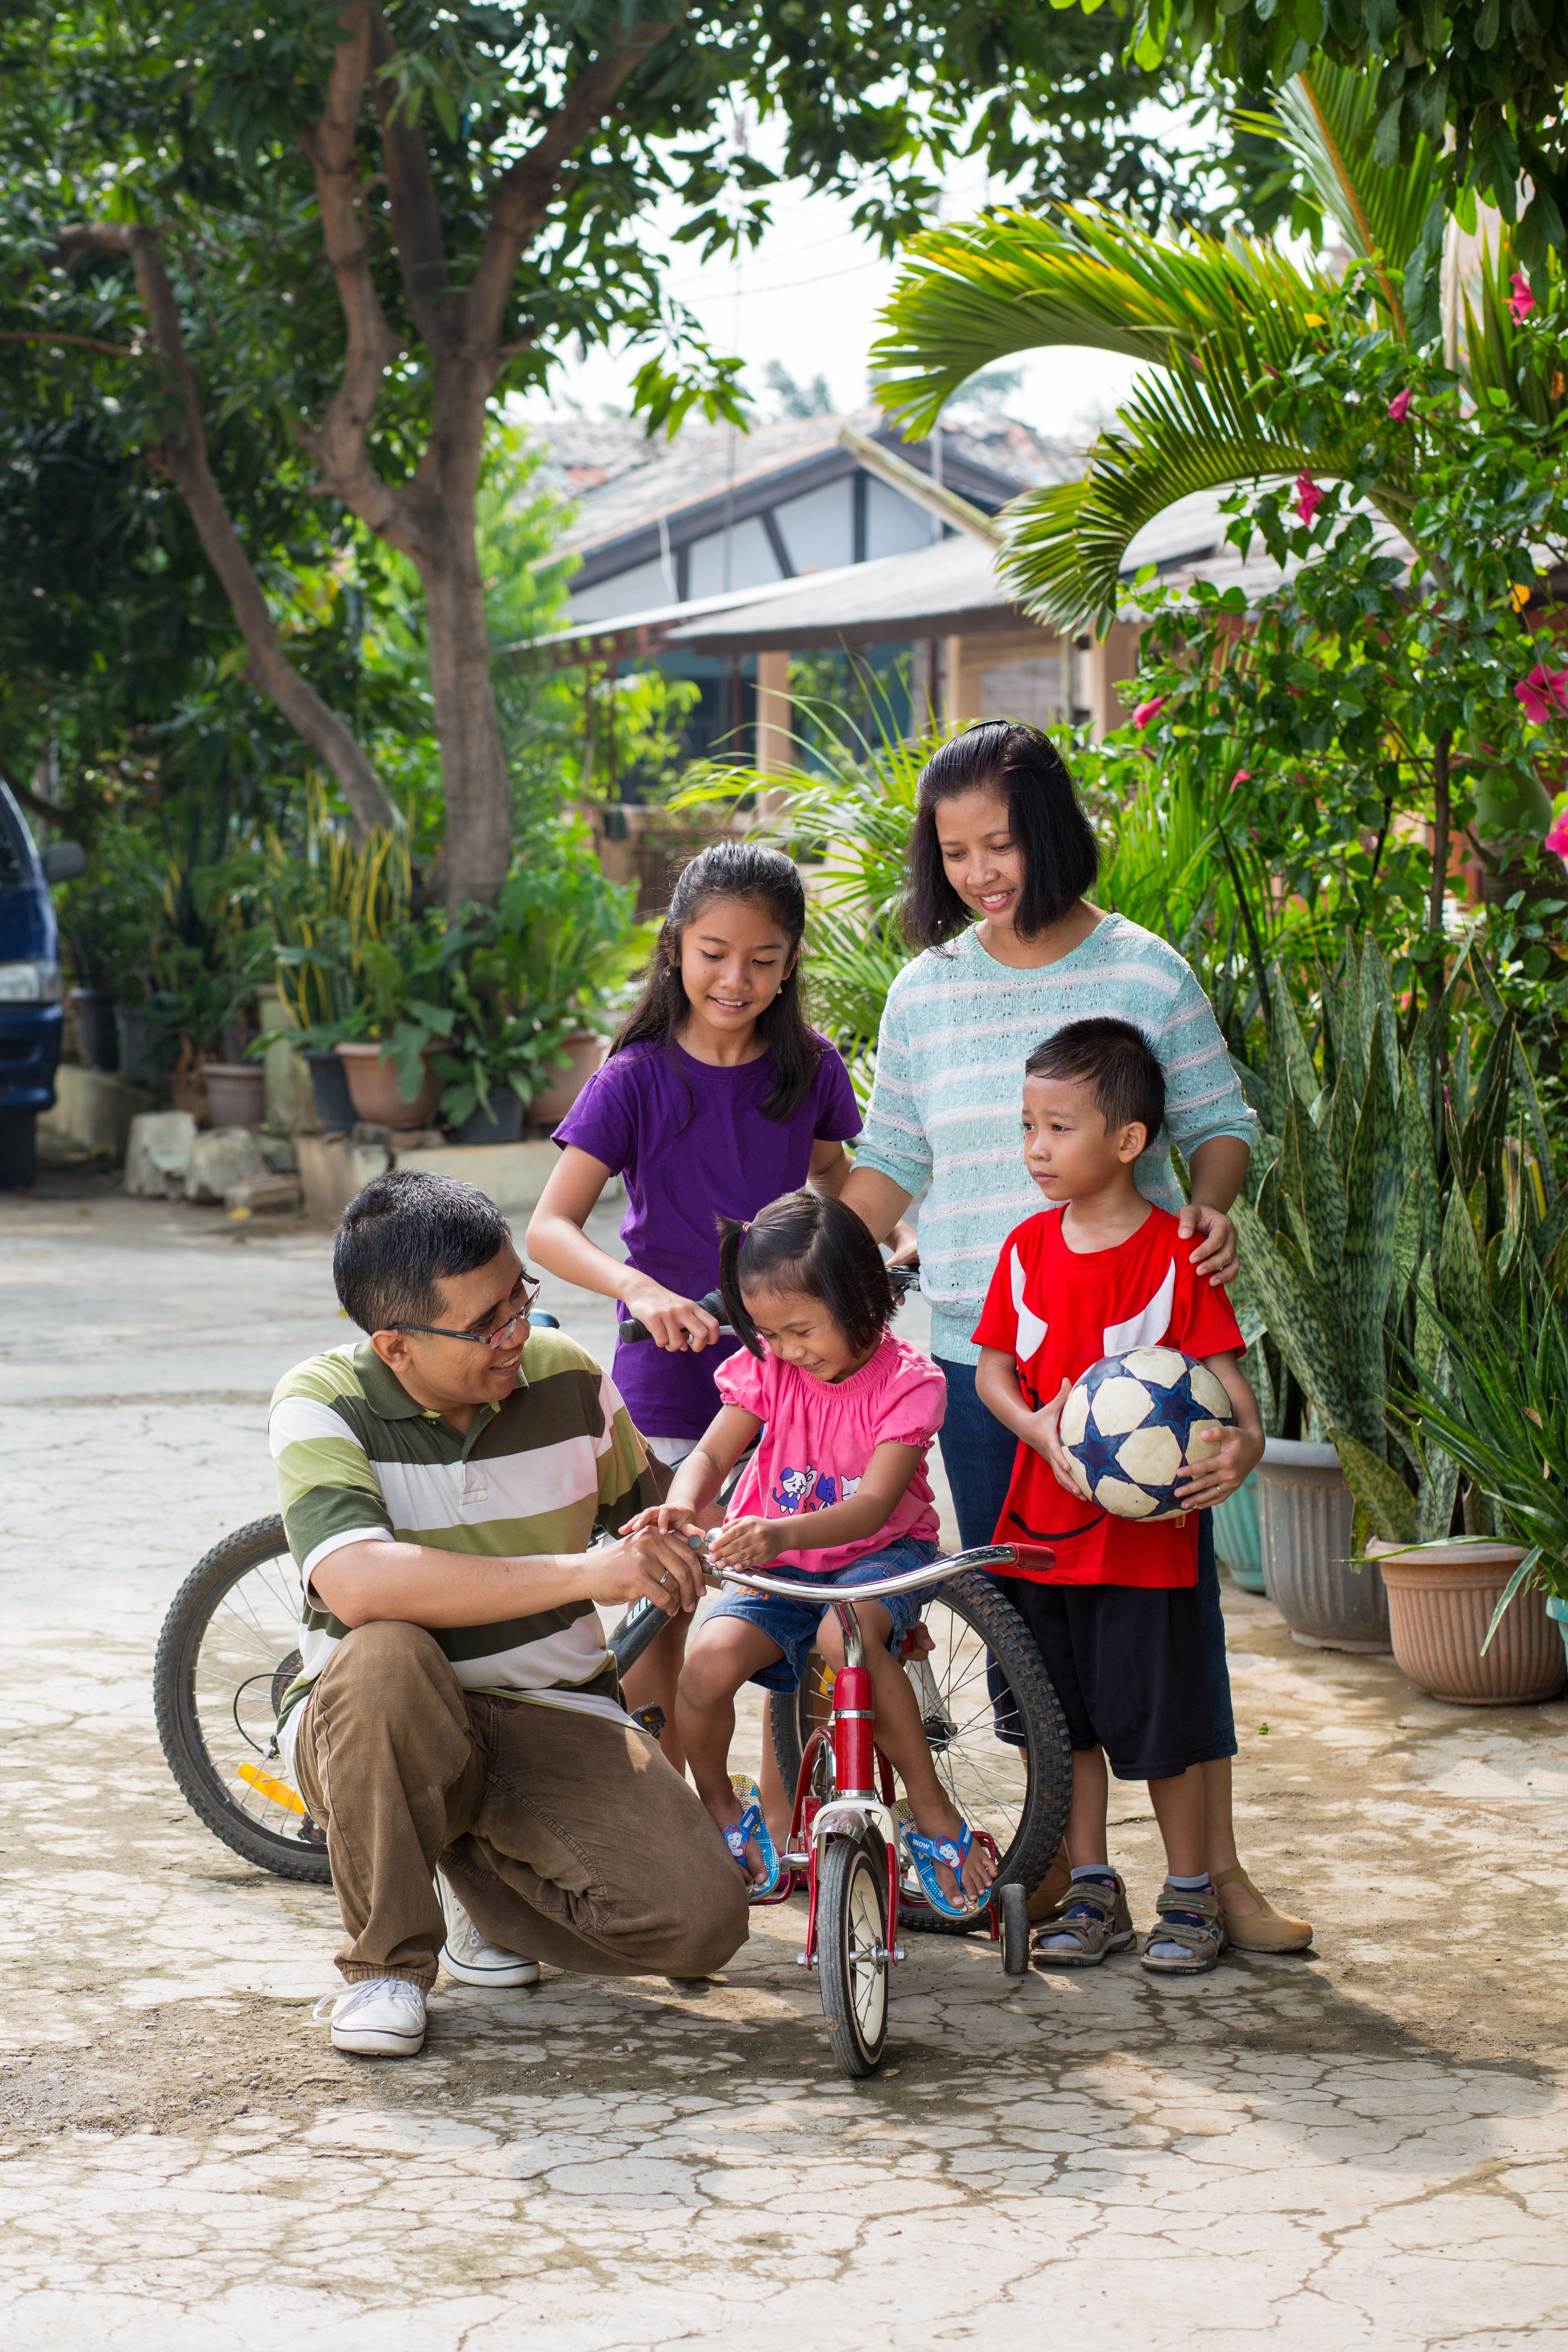 A family preparing to ride bikes together.